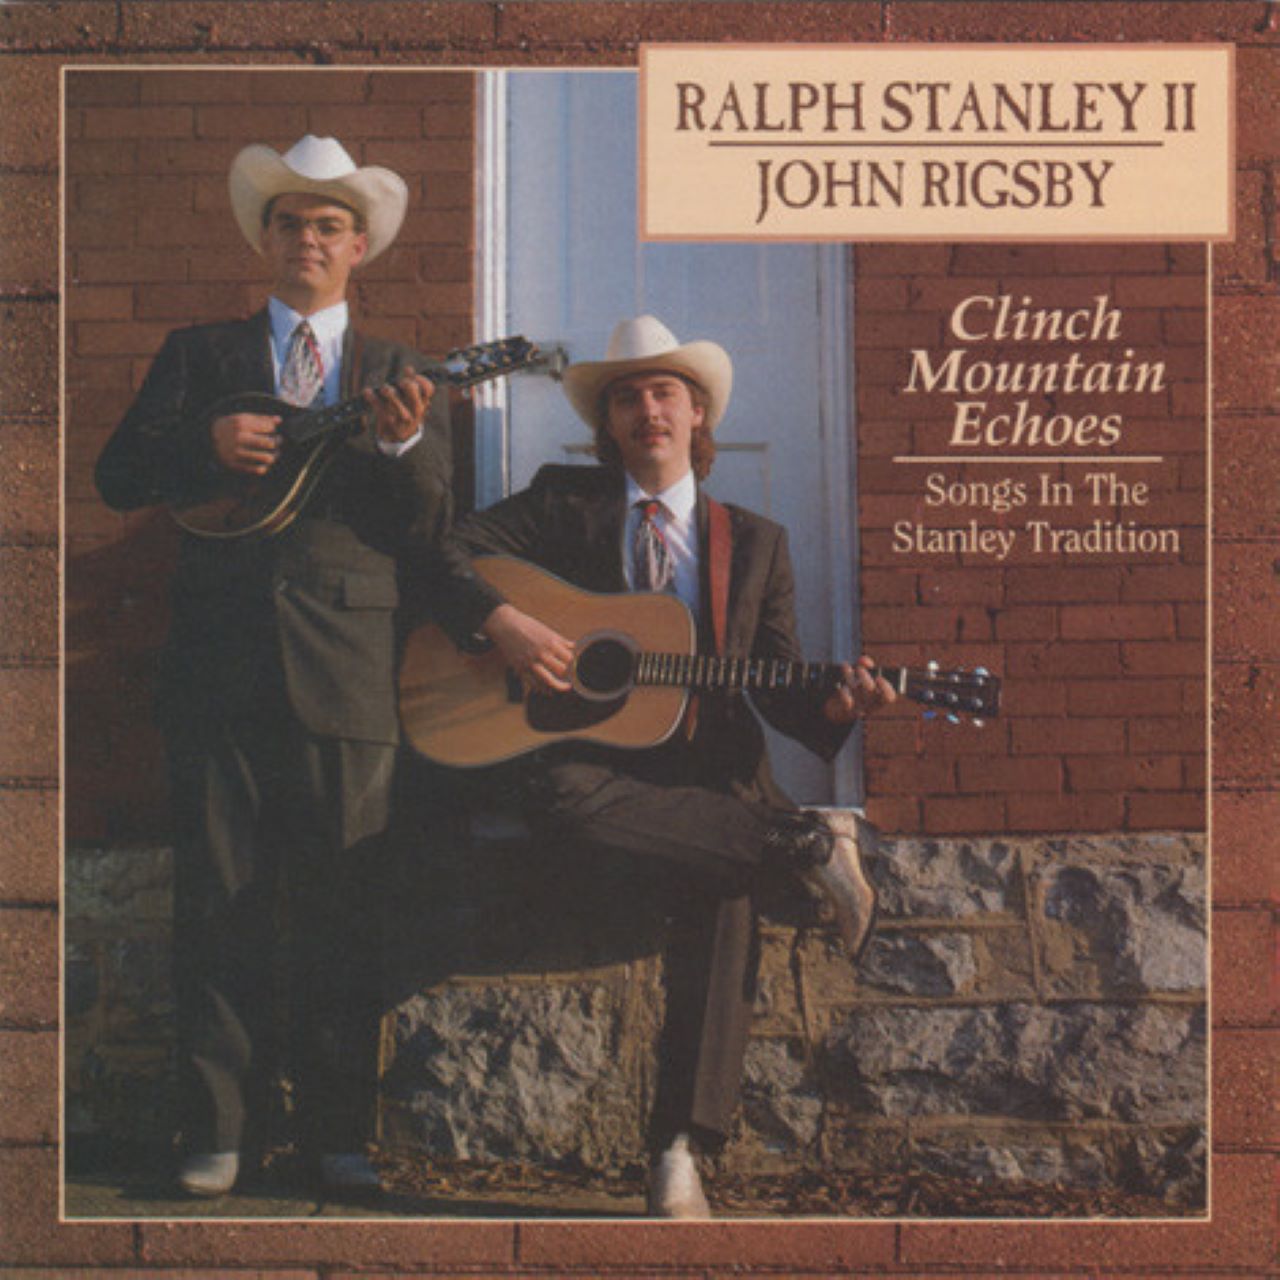 Ralph Stanley II & John Rigsby - Clinch Mountain Echoes cover album